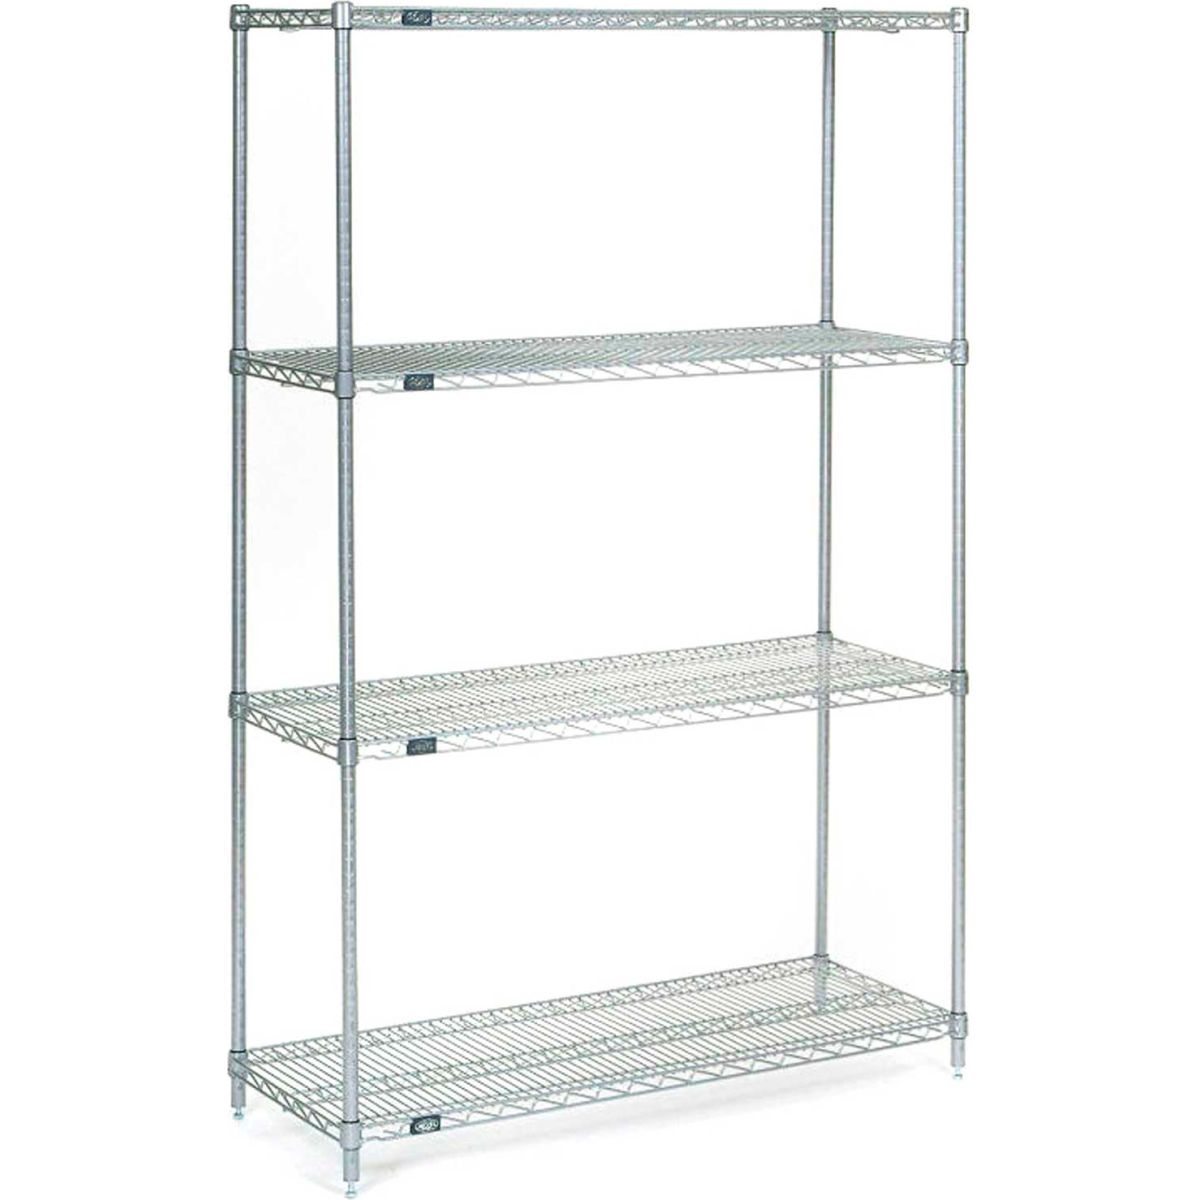 Picture of Global Industrial 14487S 74 x 48 x 14 in. Nexel Stainless Steel Starter Wire Shelving